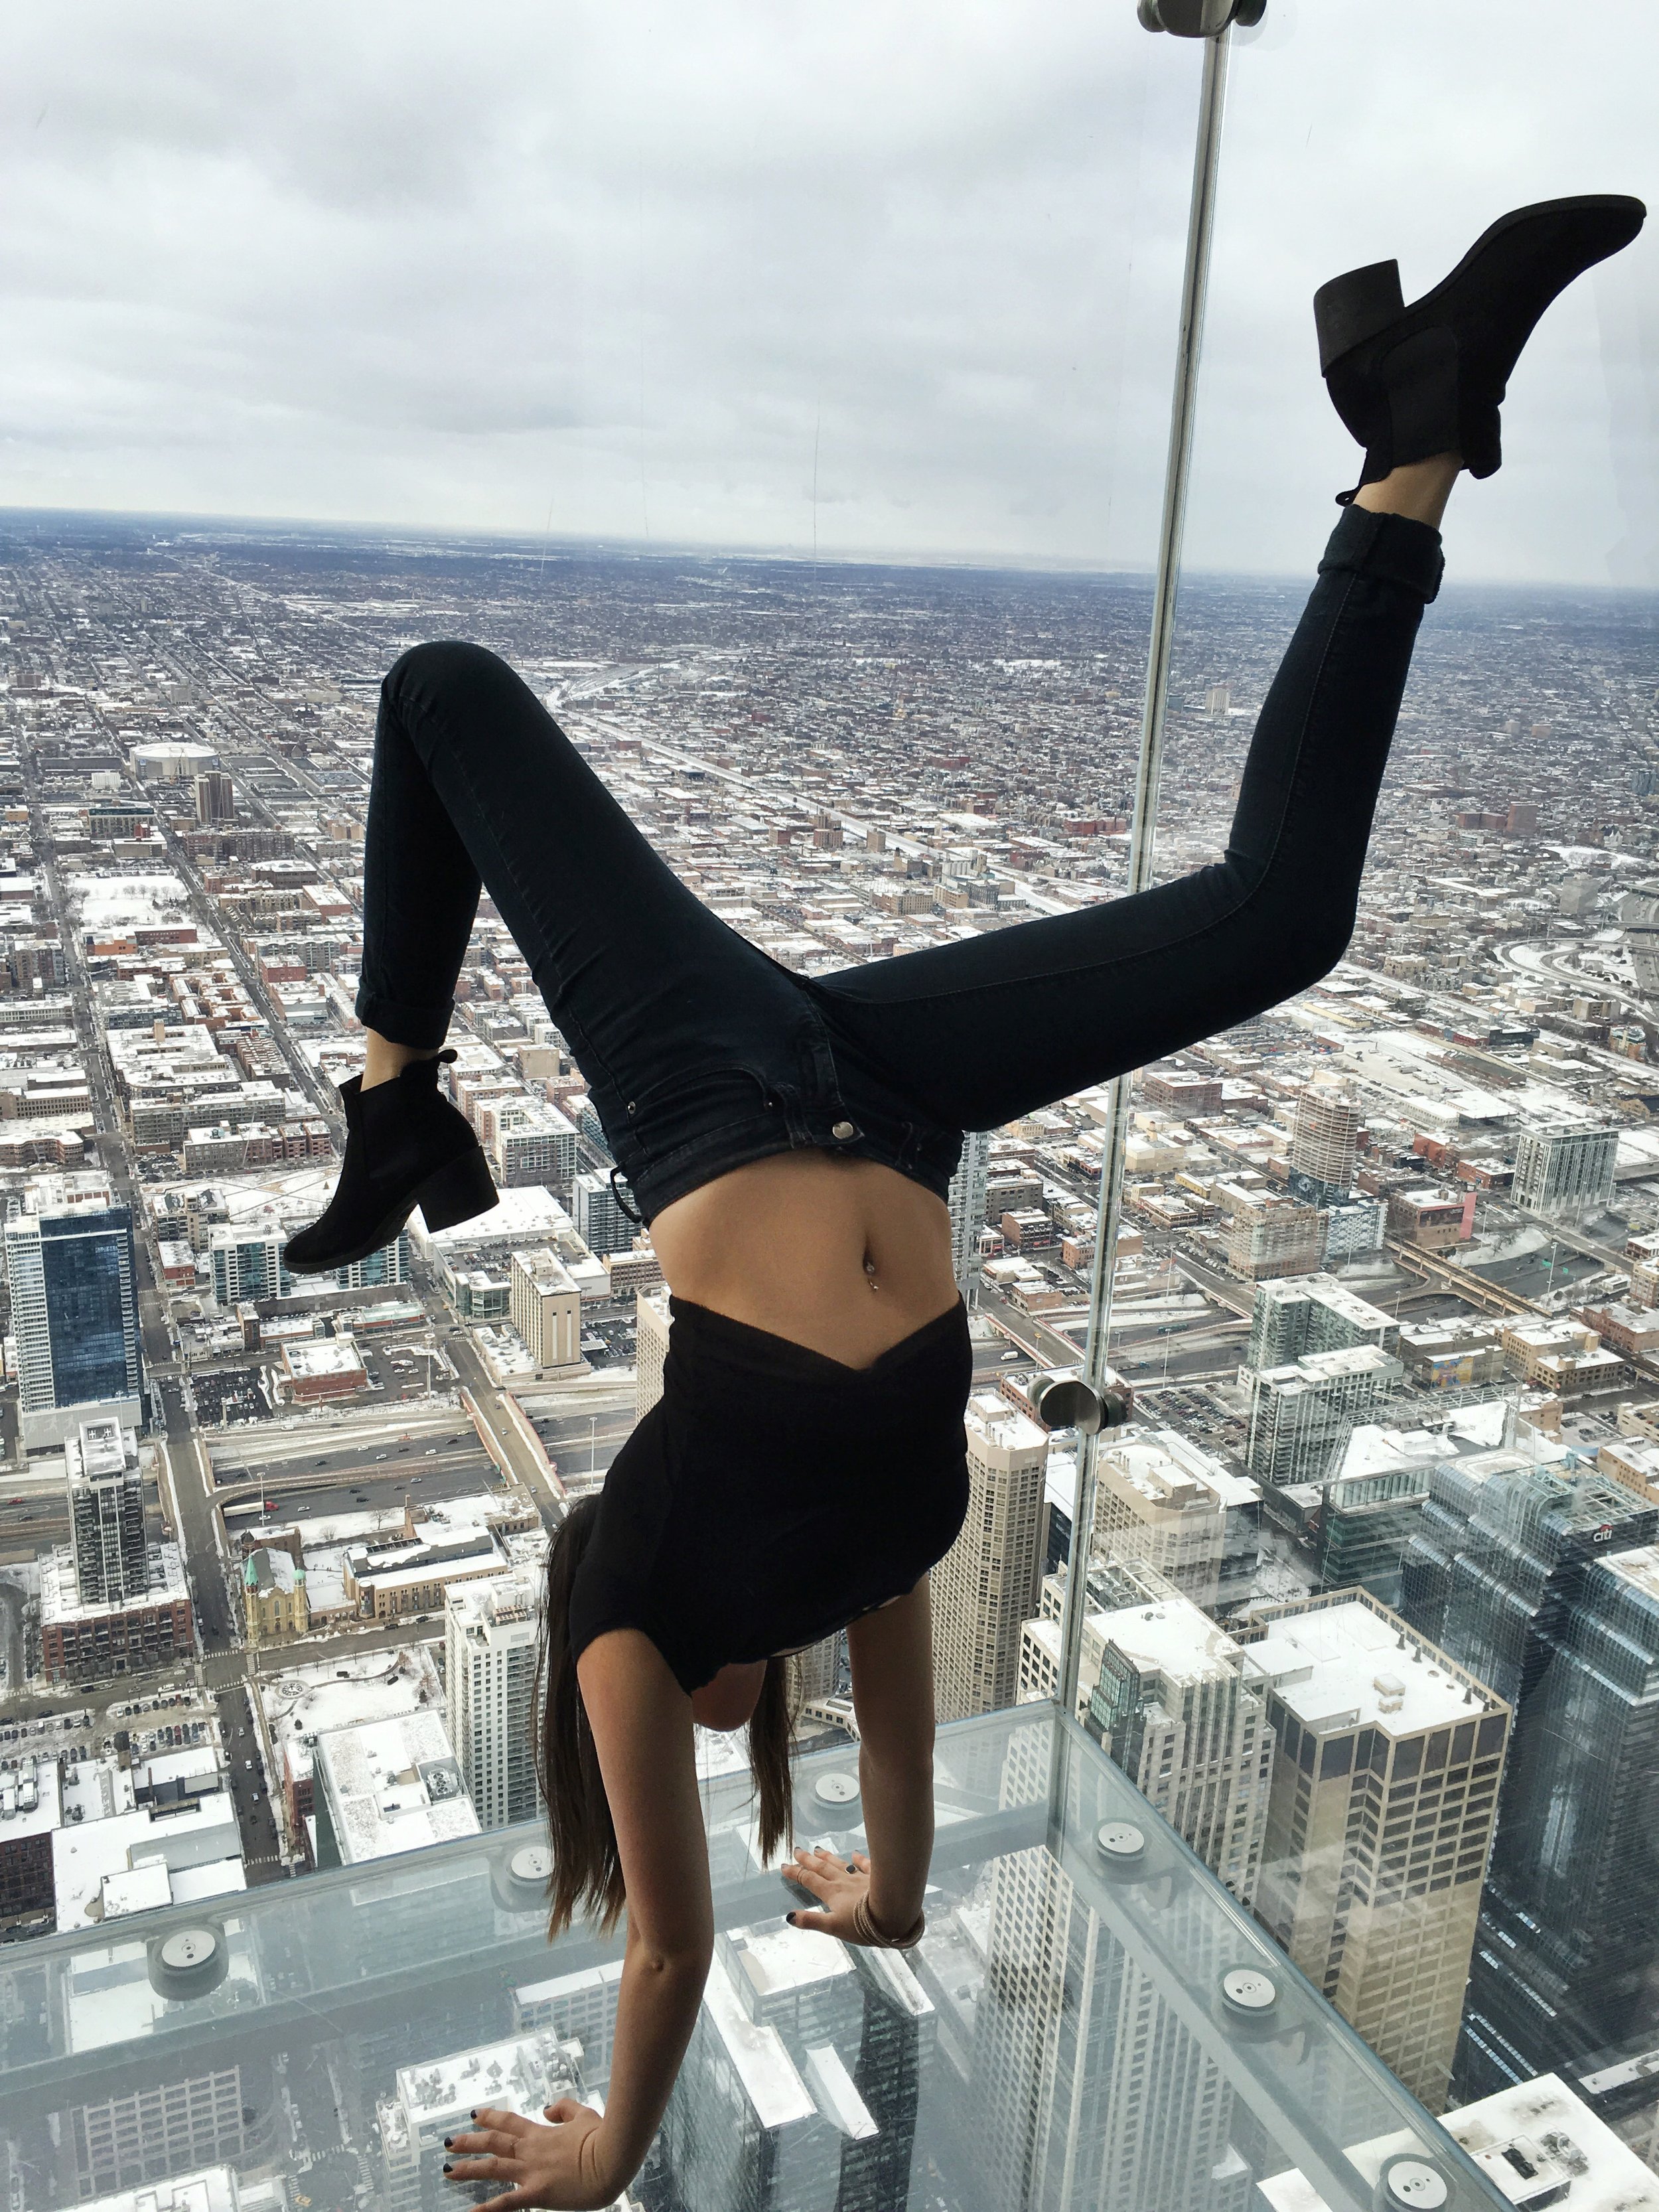 chicago_sears_tower_handstand.JPG